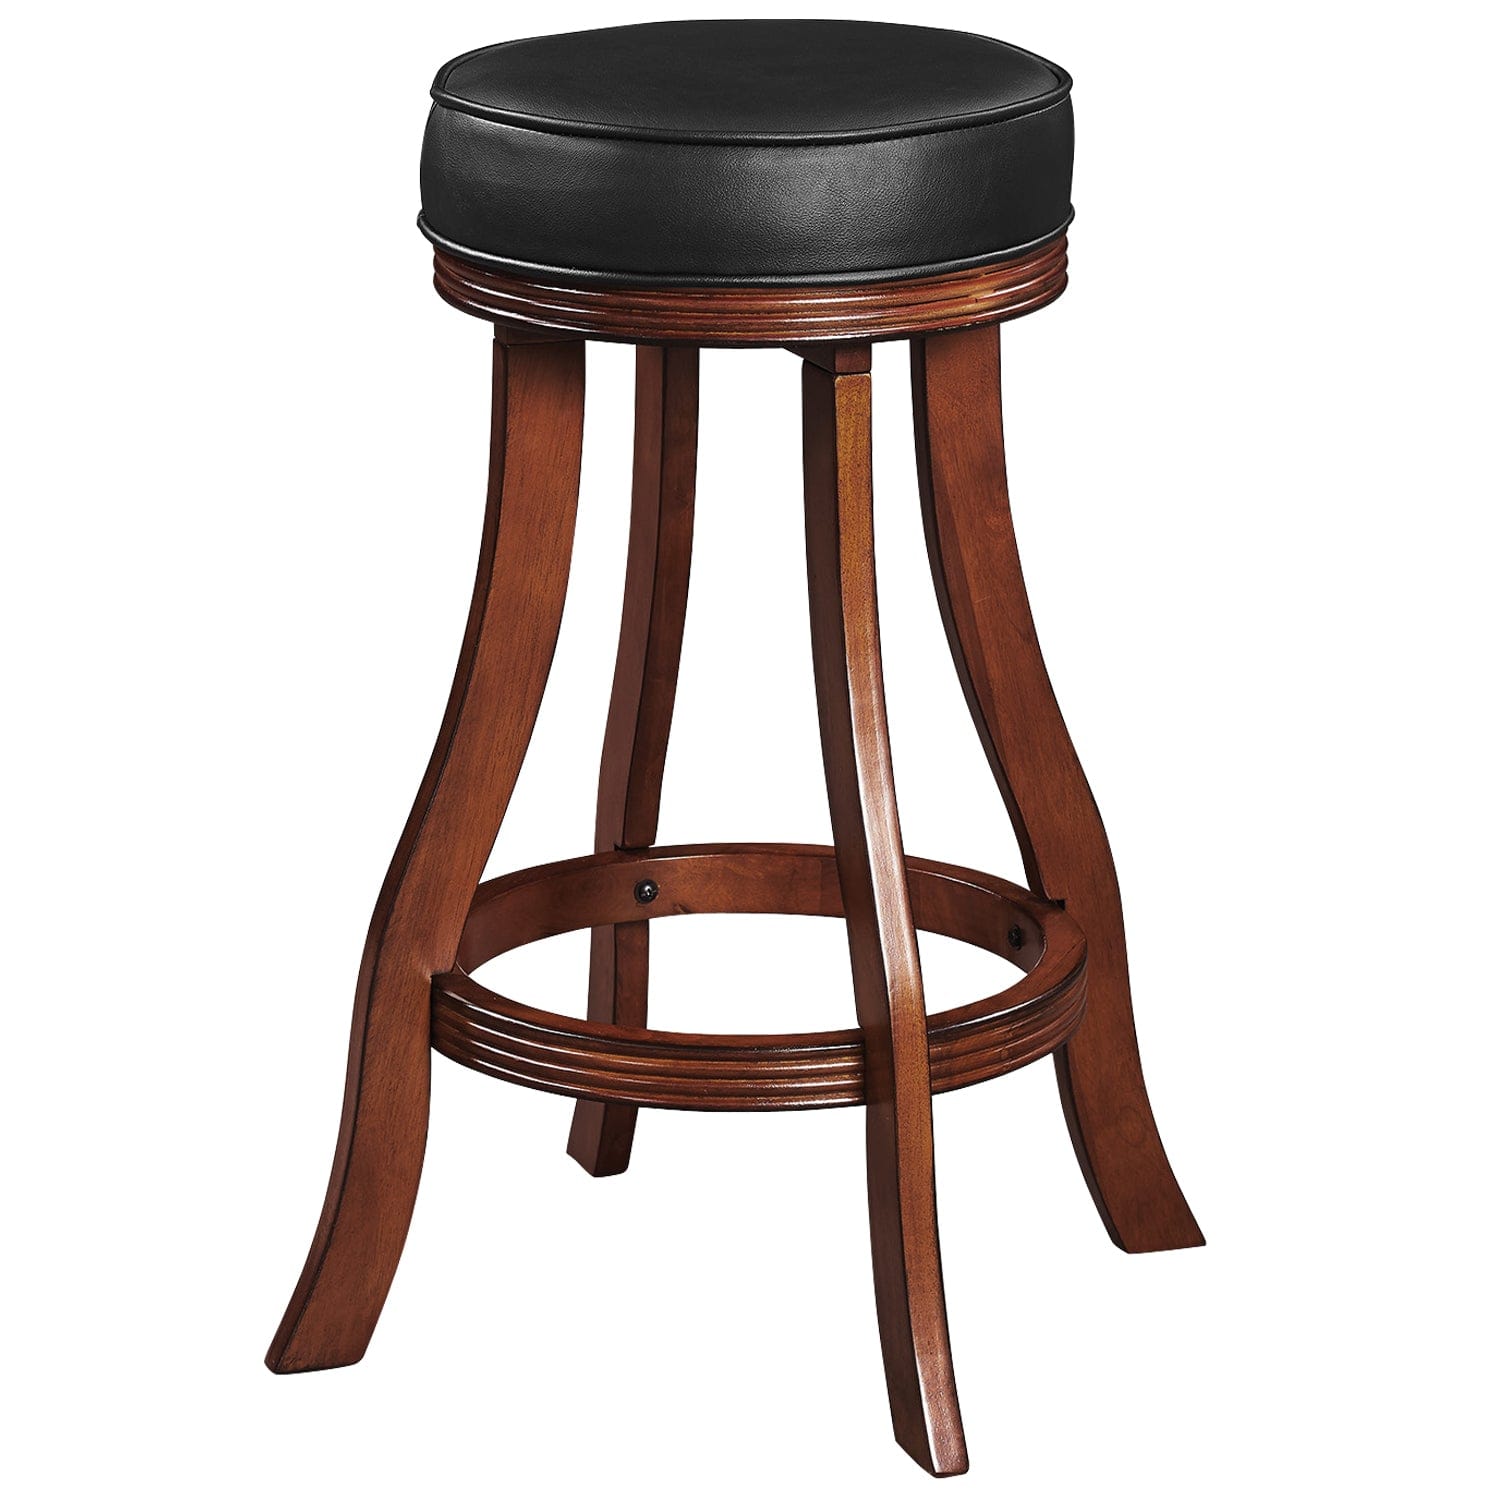 RAM Game Room Backless Home Bar Stool Antique White - Atomic Game Store